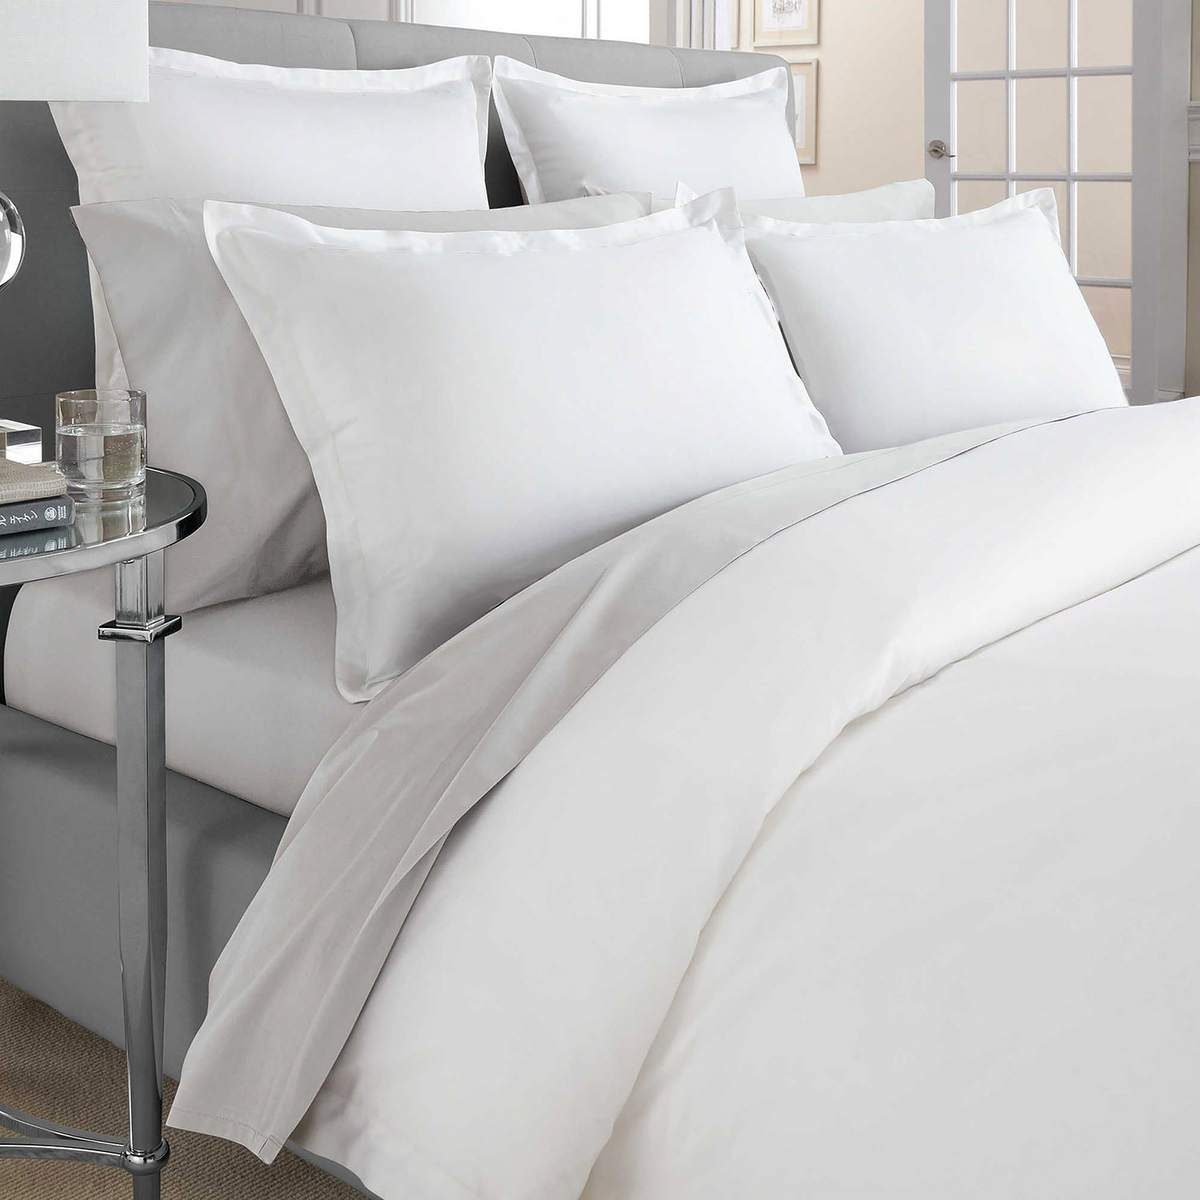 Gryphon Collection - WestPoint Hospitality Bedding Collection